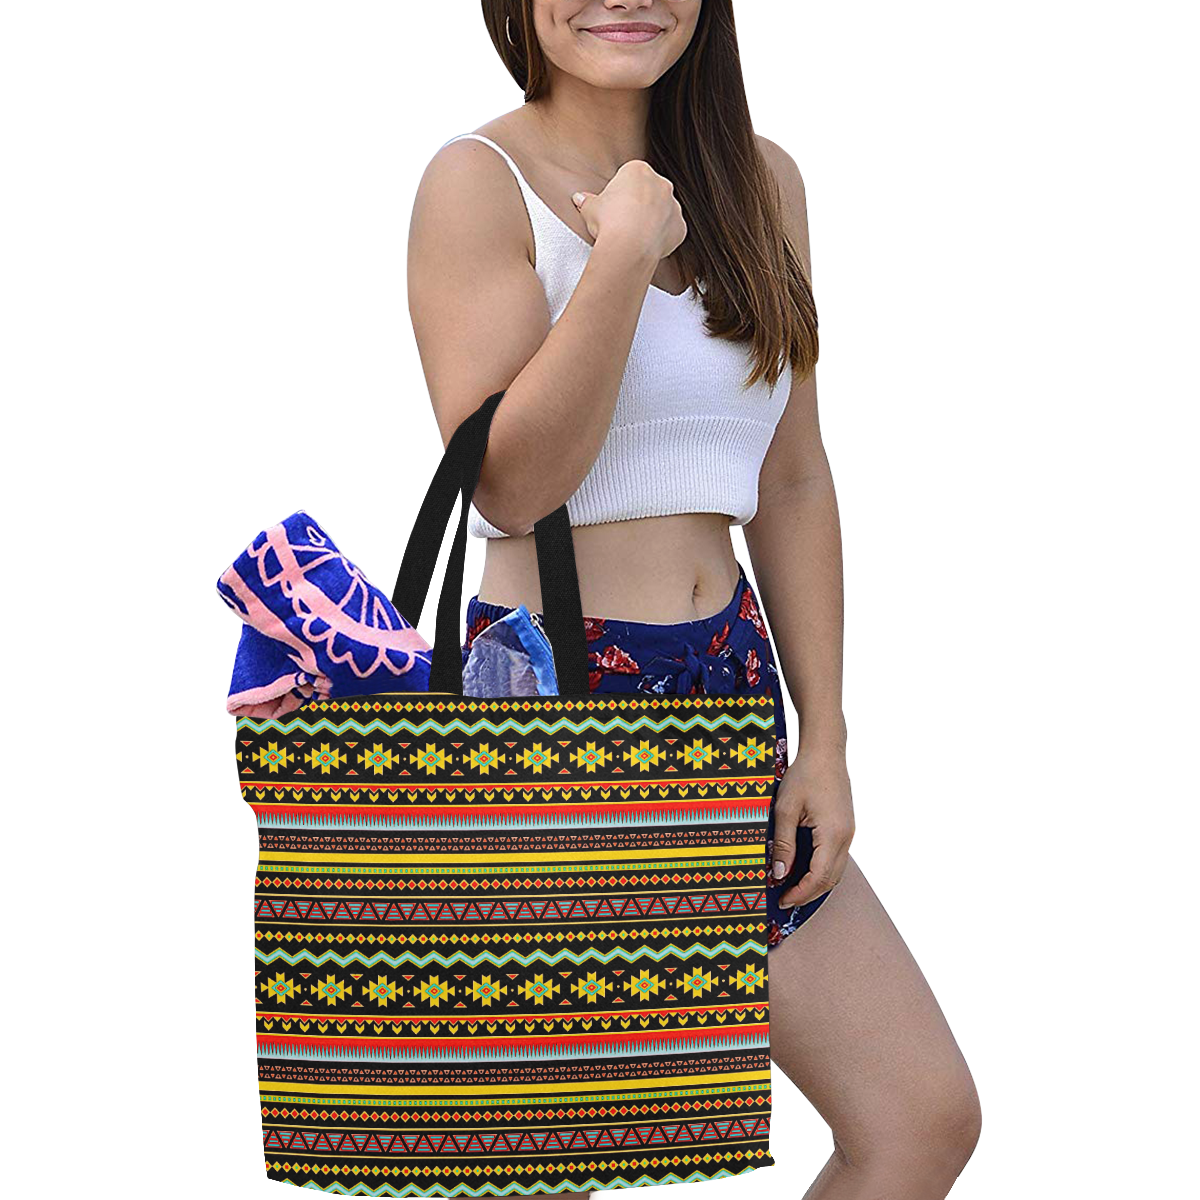 bright tribal All Over Print Canvas Tote Bag/Large (Model 1699)